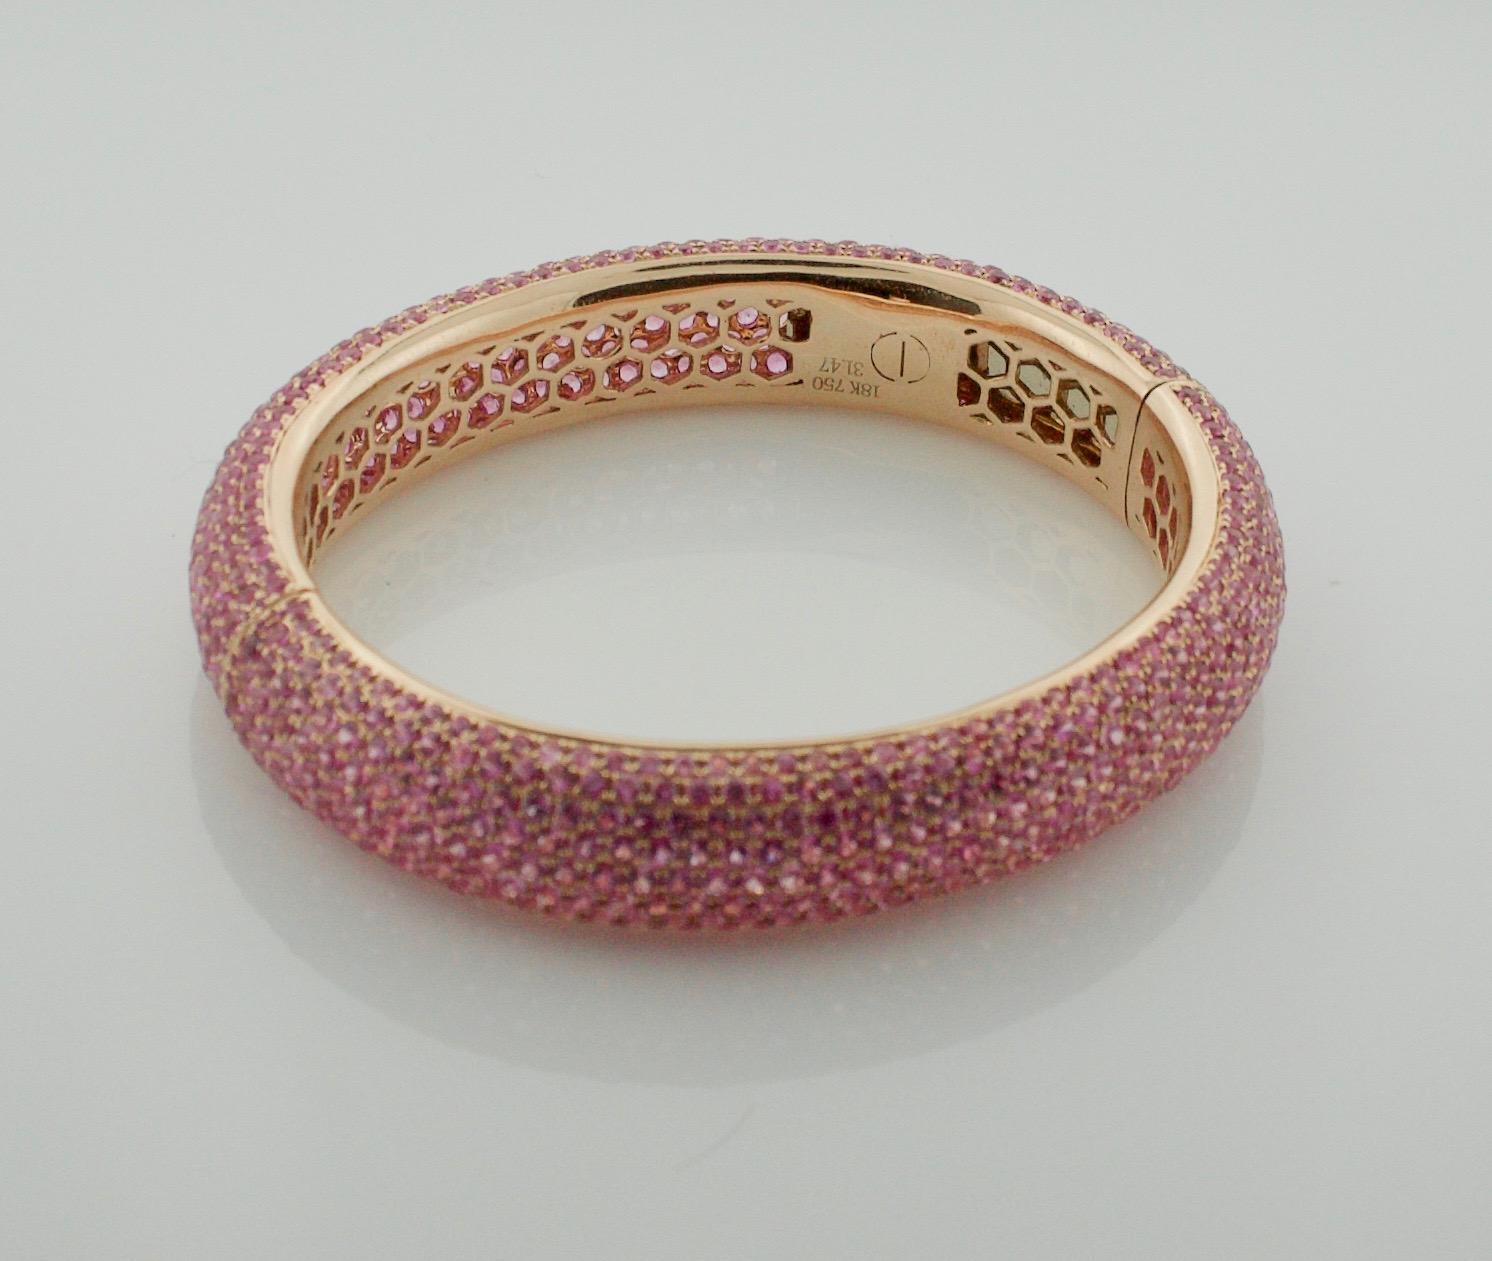 Stunning Pink Sapphire Bangle Bracelet in 18k Rose Gold 31.47 carats
Eight Hundred and Sixty Eight Round Cut Pink Sapphires weighing 31.47 carats.  [bright with no imperfections visible to the naked eye]

Constructed by One of Our Finest Craftsmen. 